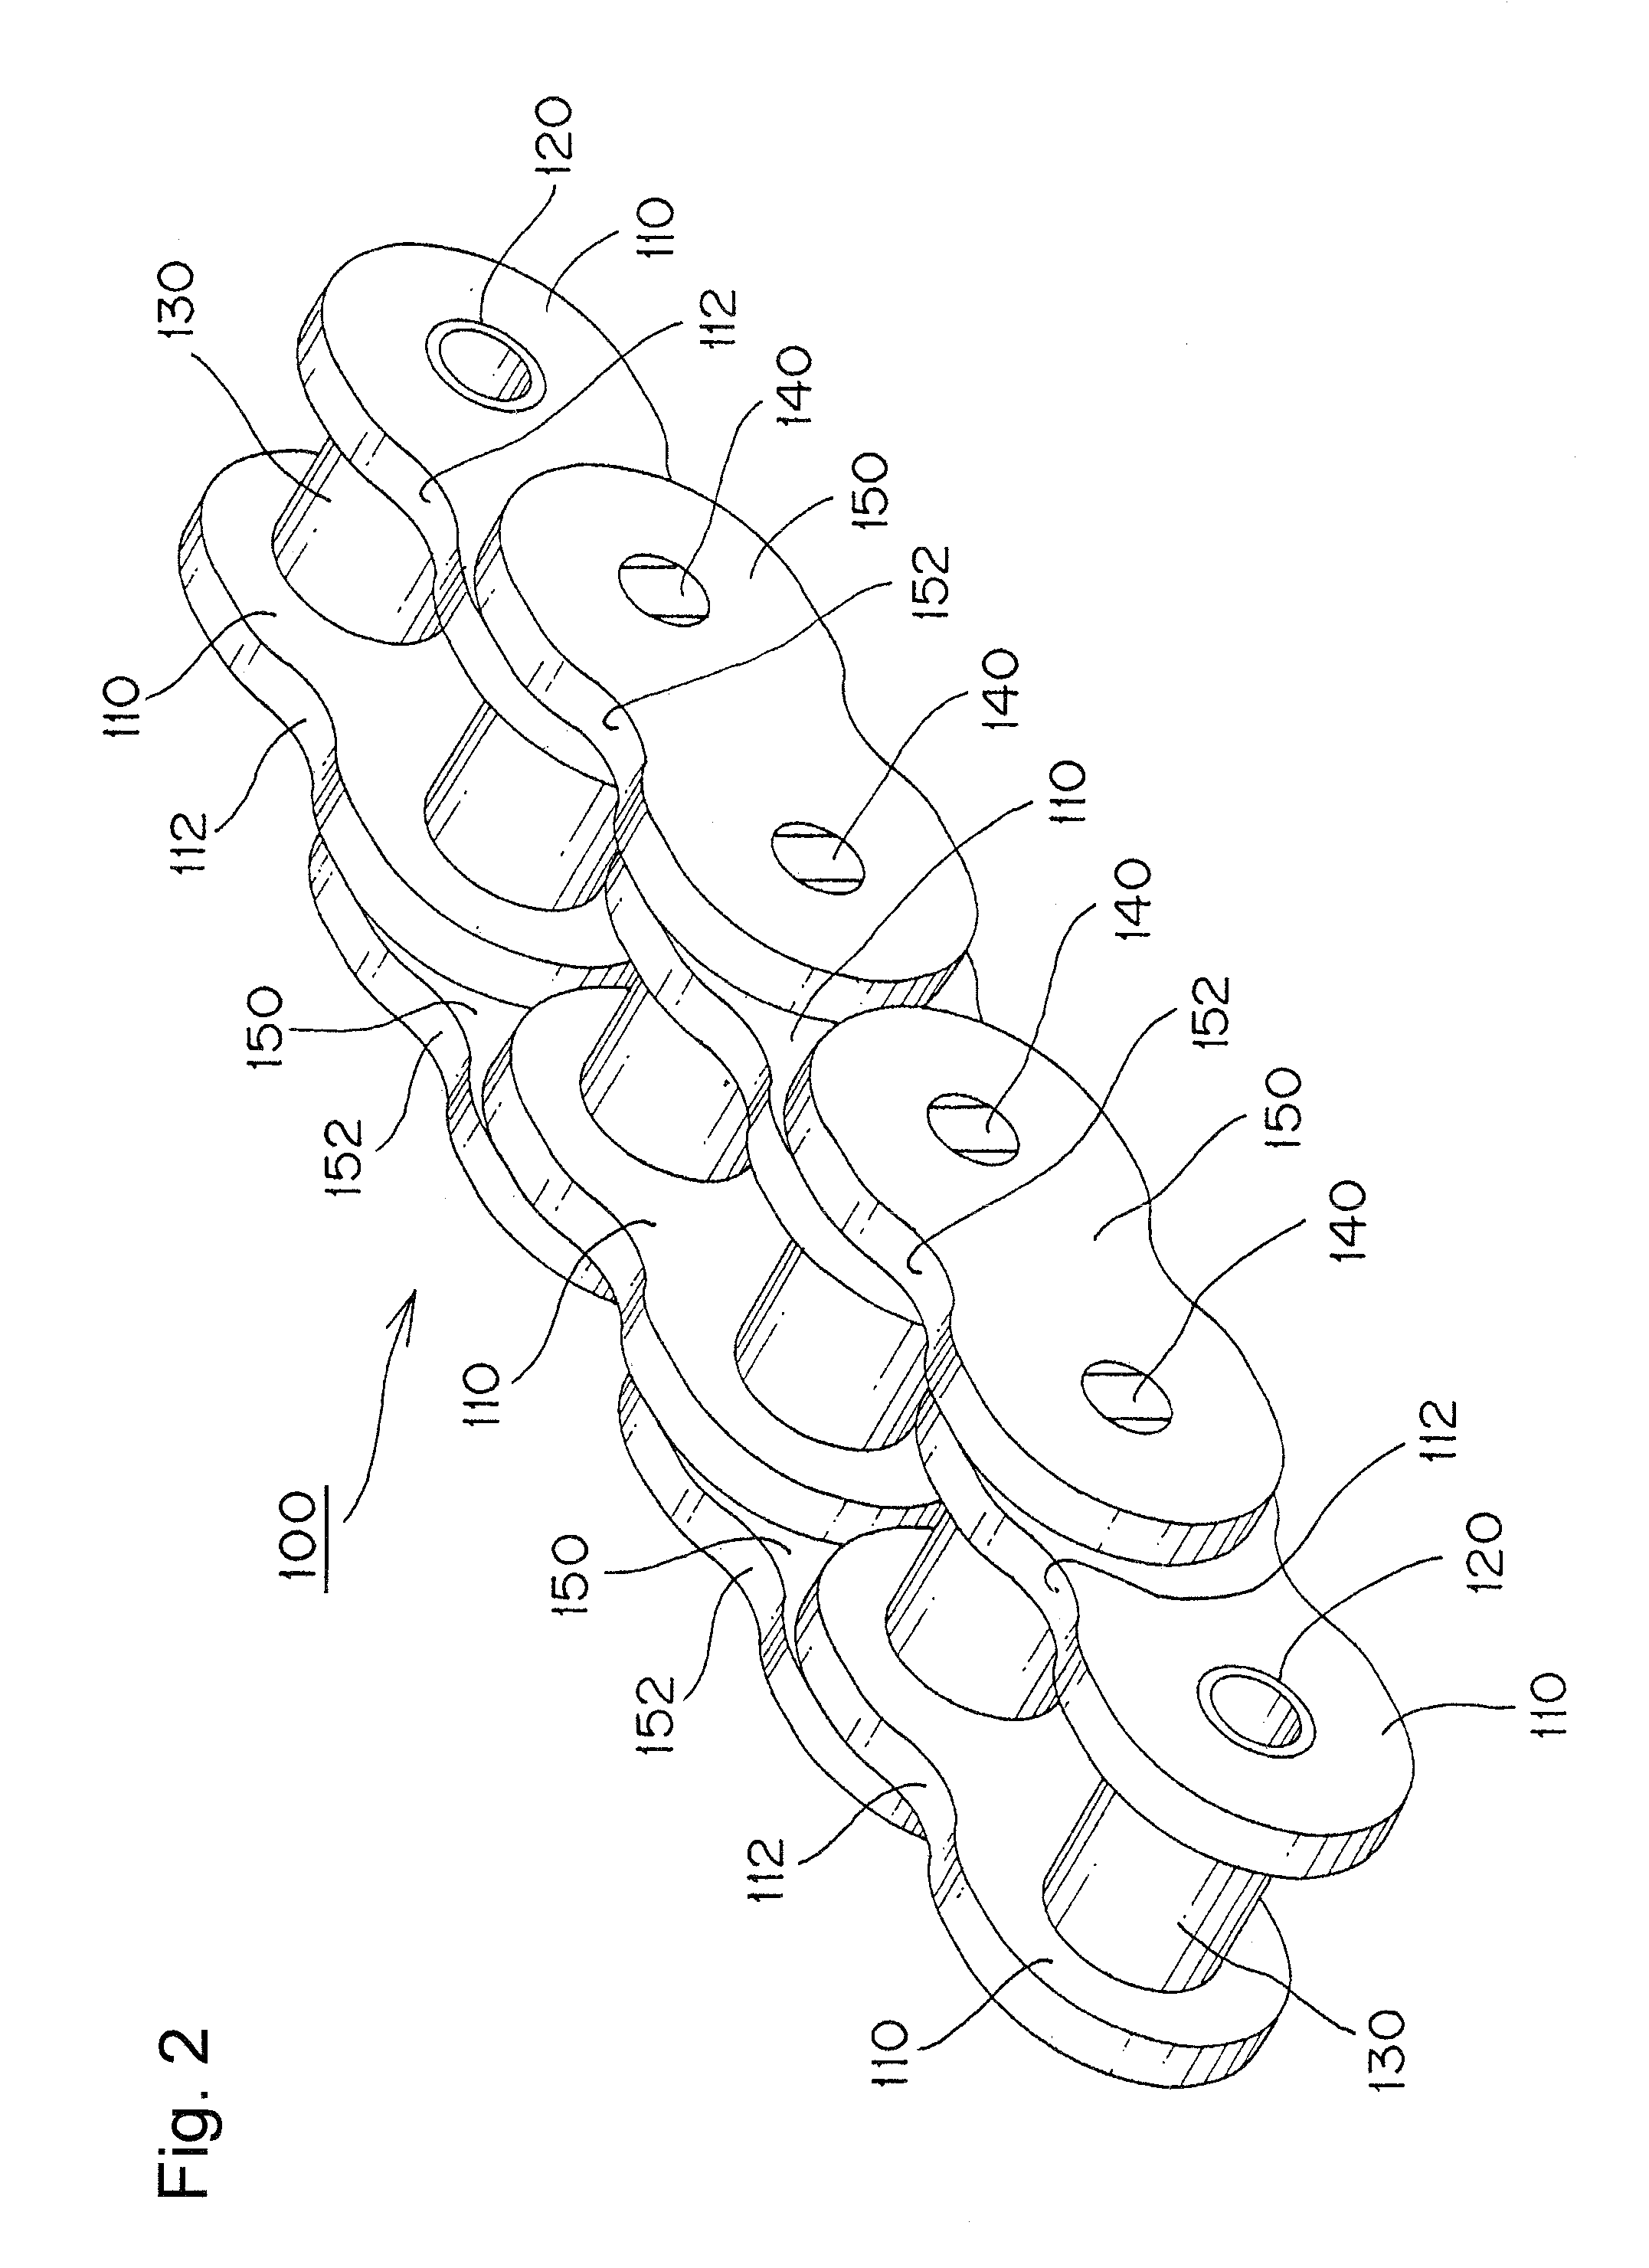 Transmission chain for use in engine